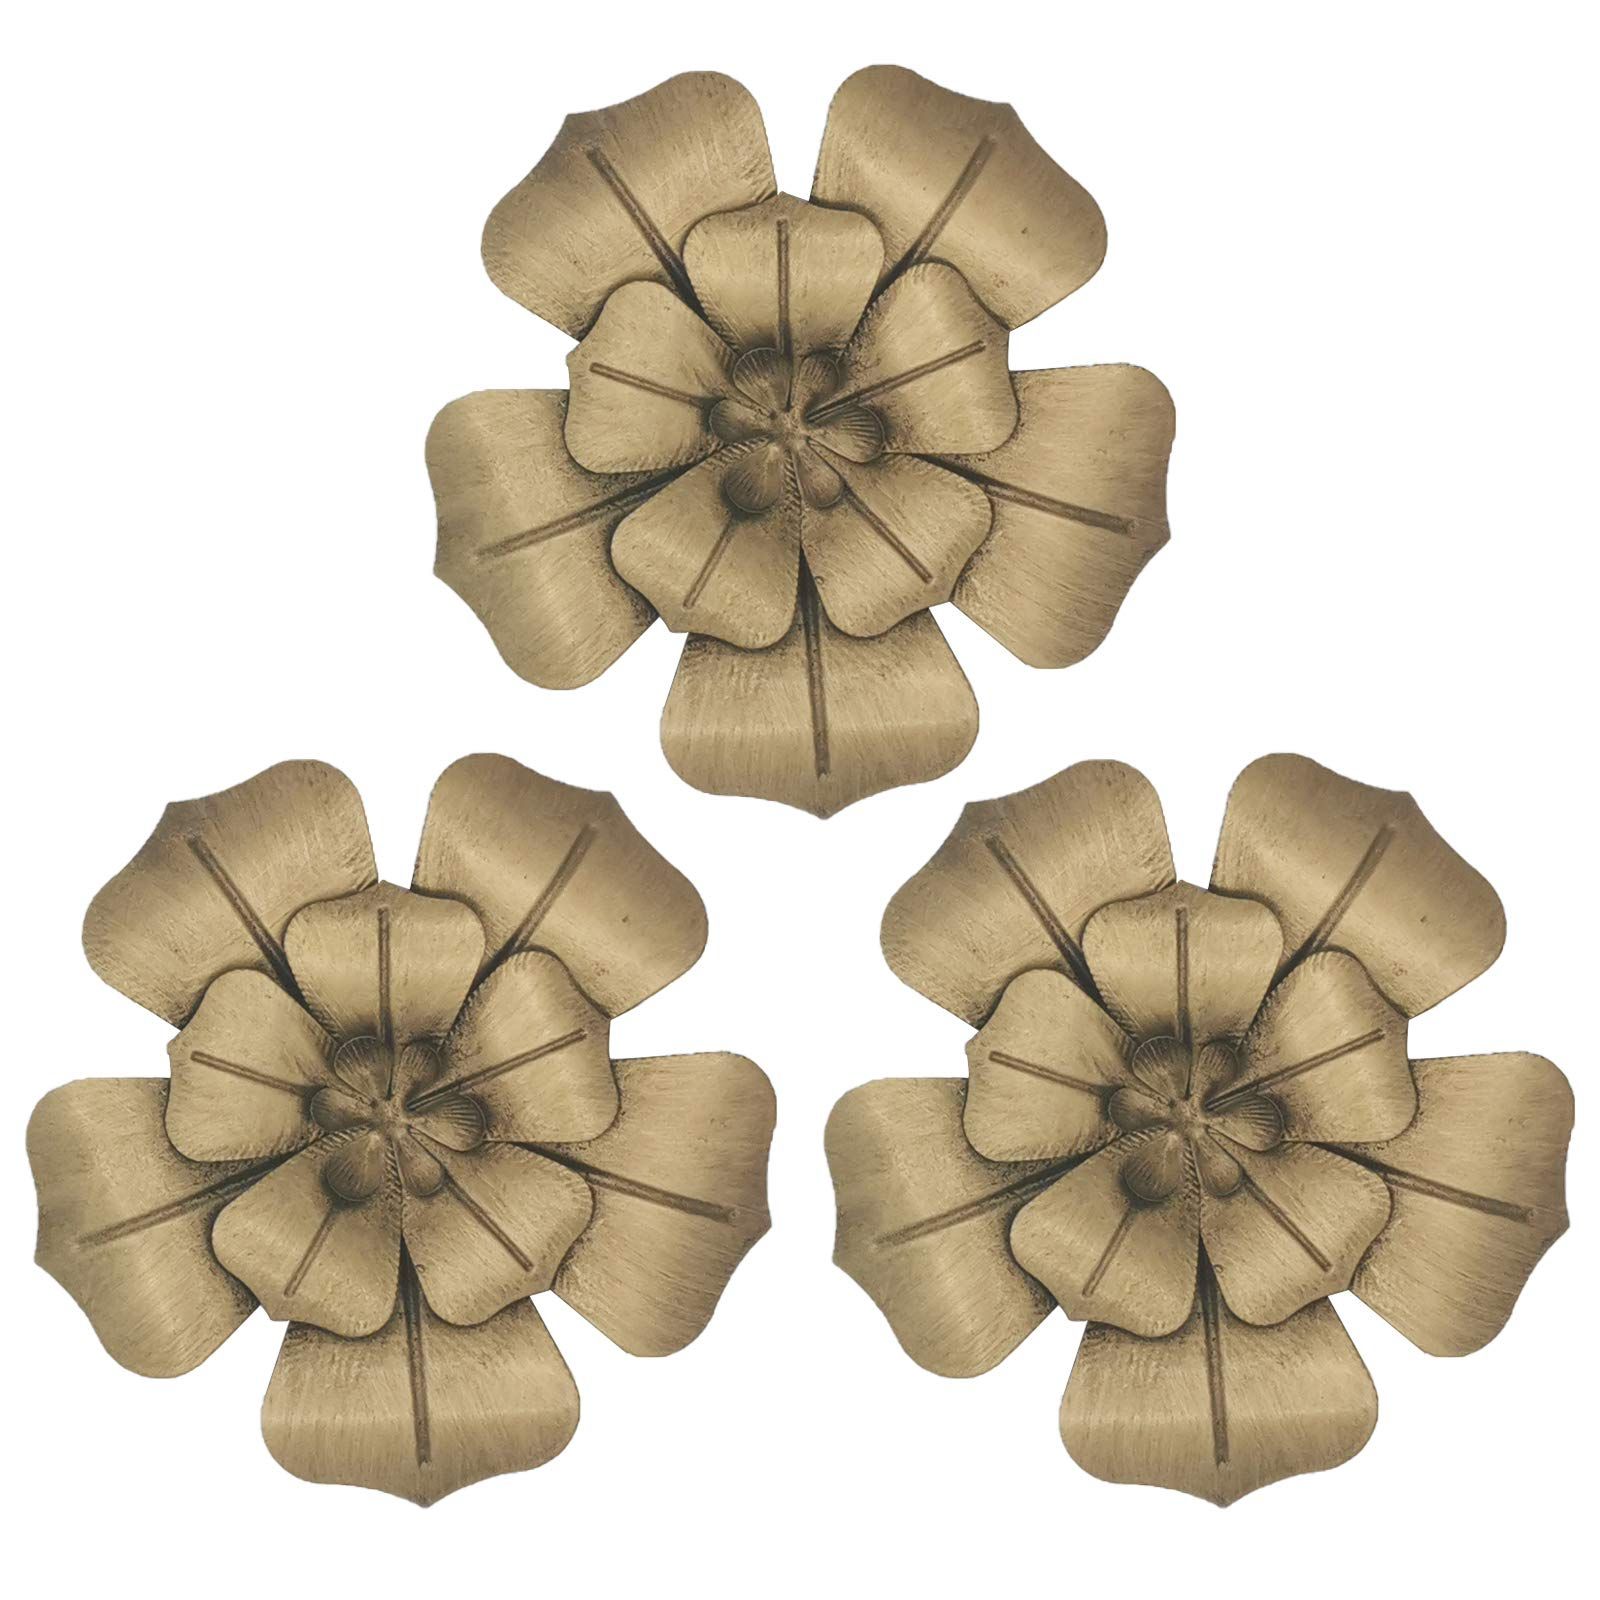 3 Layers Wall Sculptures Throughout Famous Amazon: Sqshun 6 Inch Multiple Layer Flower Metal Wall Art Decor Set Of  3 (gold) : Patio, Lawn & Garden (View 13 of 15)